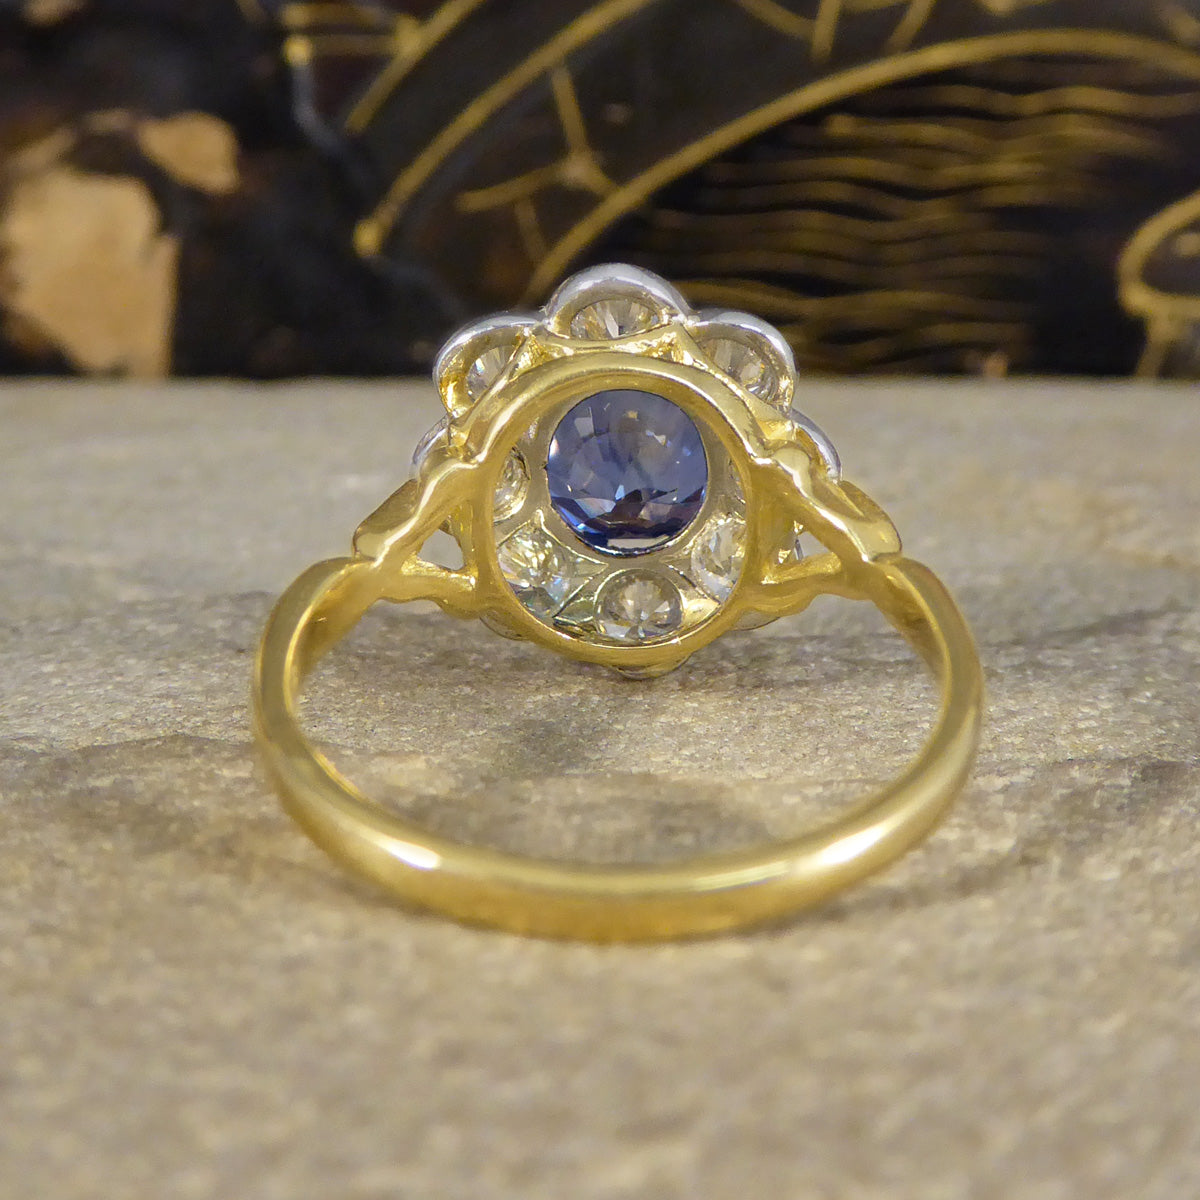 Edwardian Inspired 2.24ct Sapphire and Diamond Cluster Ring in 18ct Gold